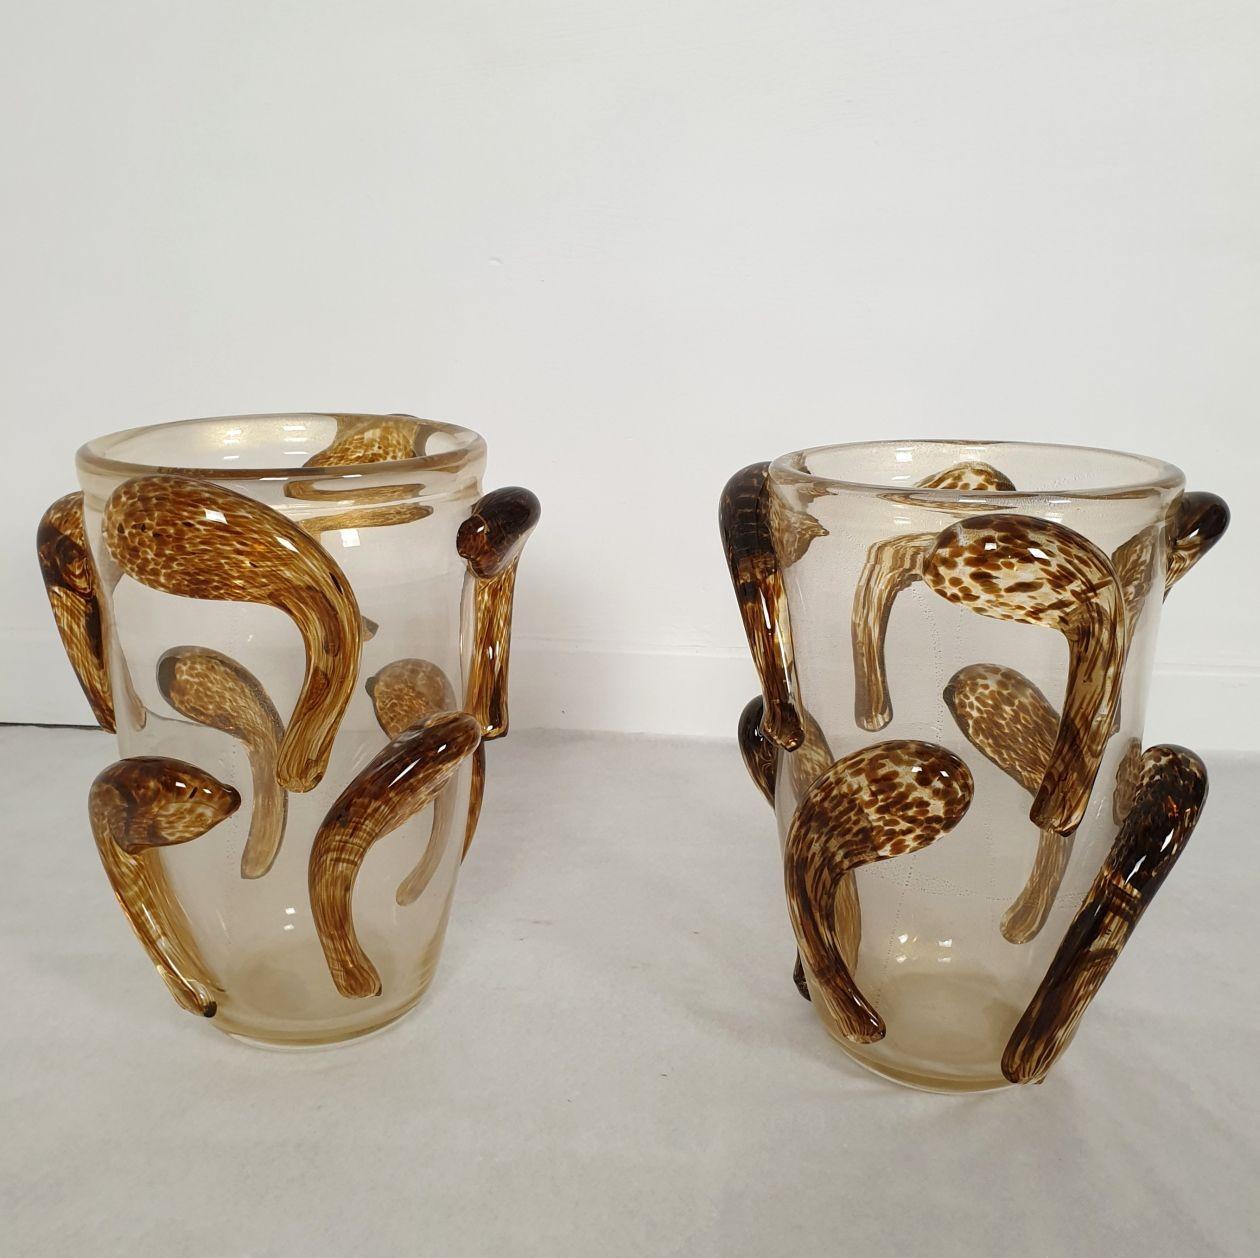 Pair of Mid-Century modern Murano glass vases, attributed to Seguso, Italy 1980s.
The pair of large vases is handmade - a clear base with thick brown and golden amber glass decorations.
The irregular ornements have a kind of leopard design.
The two